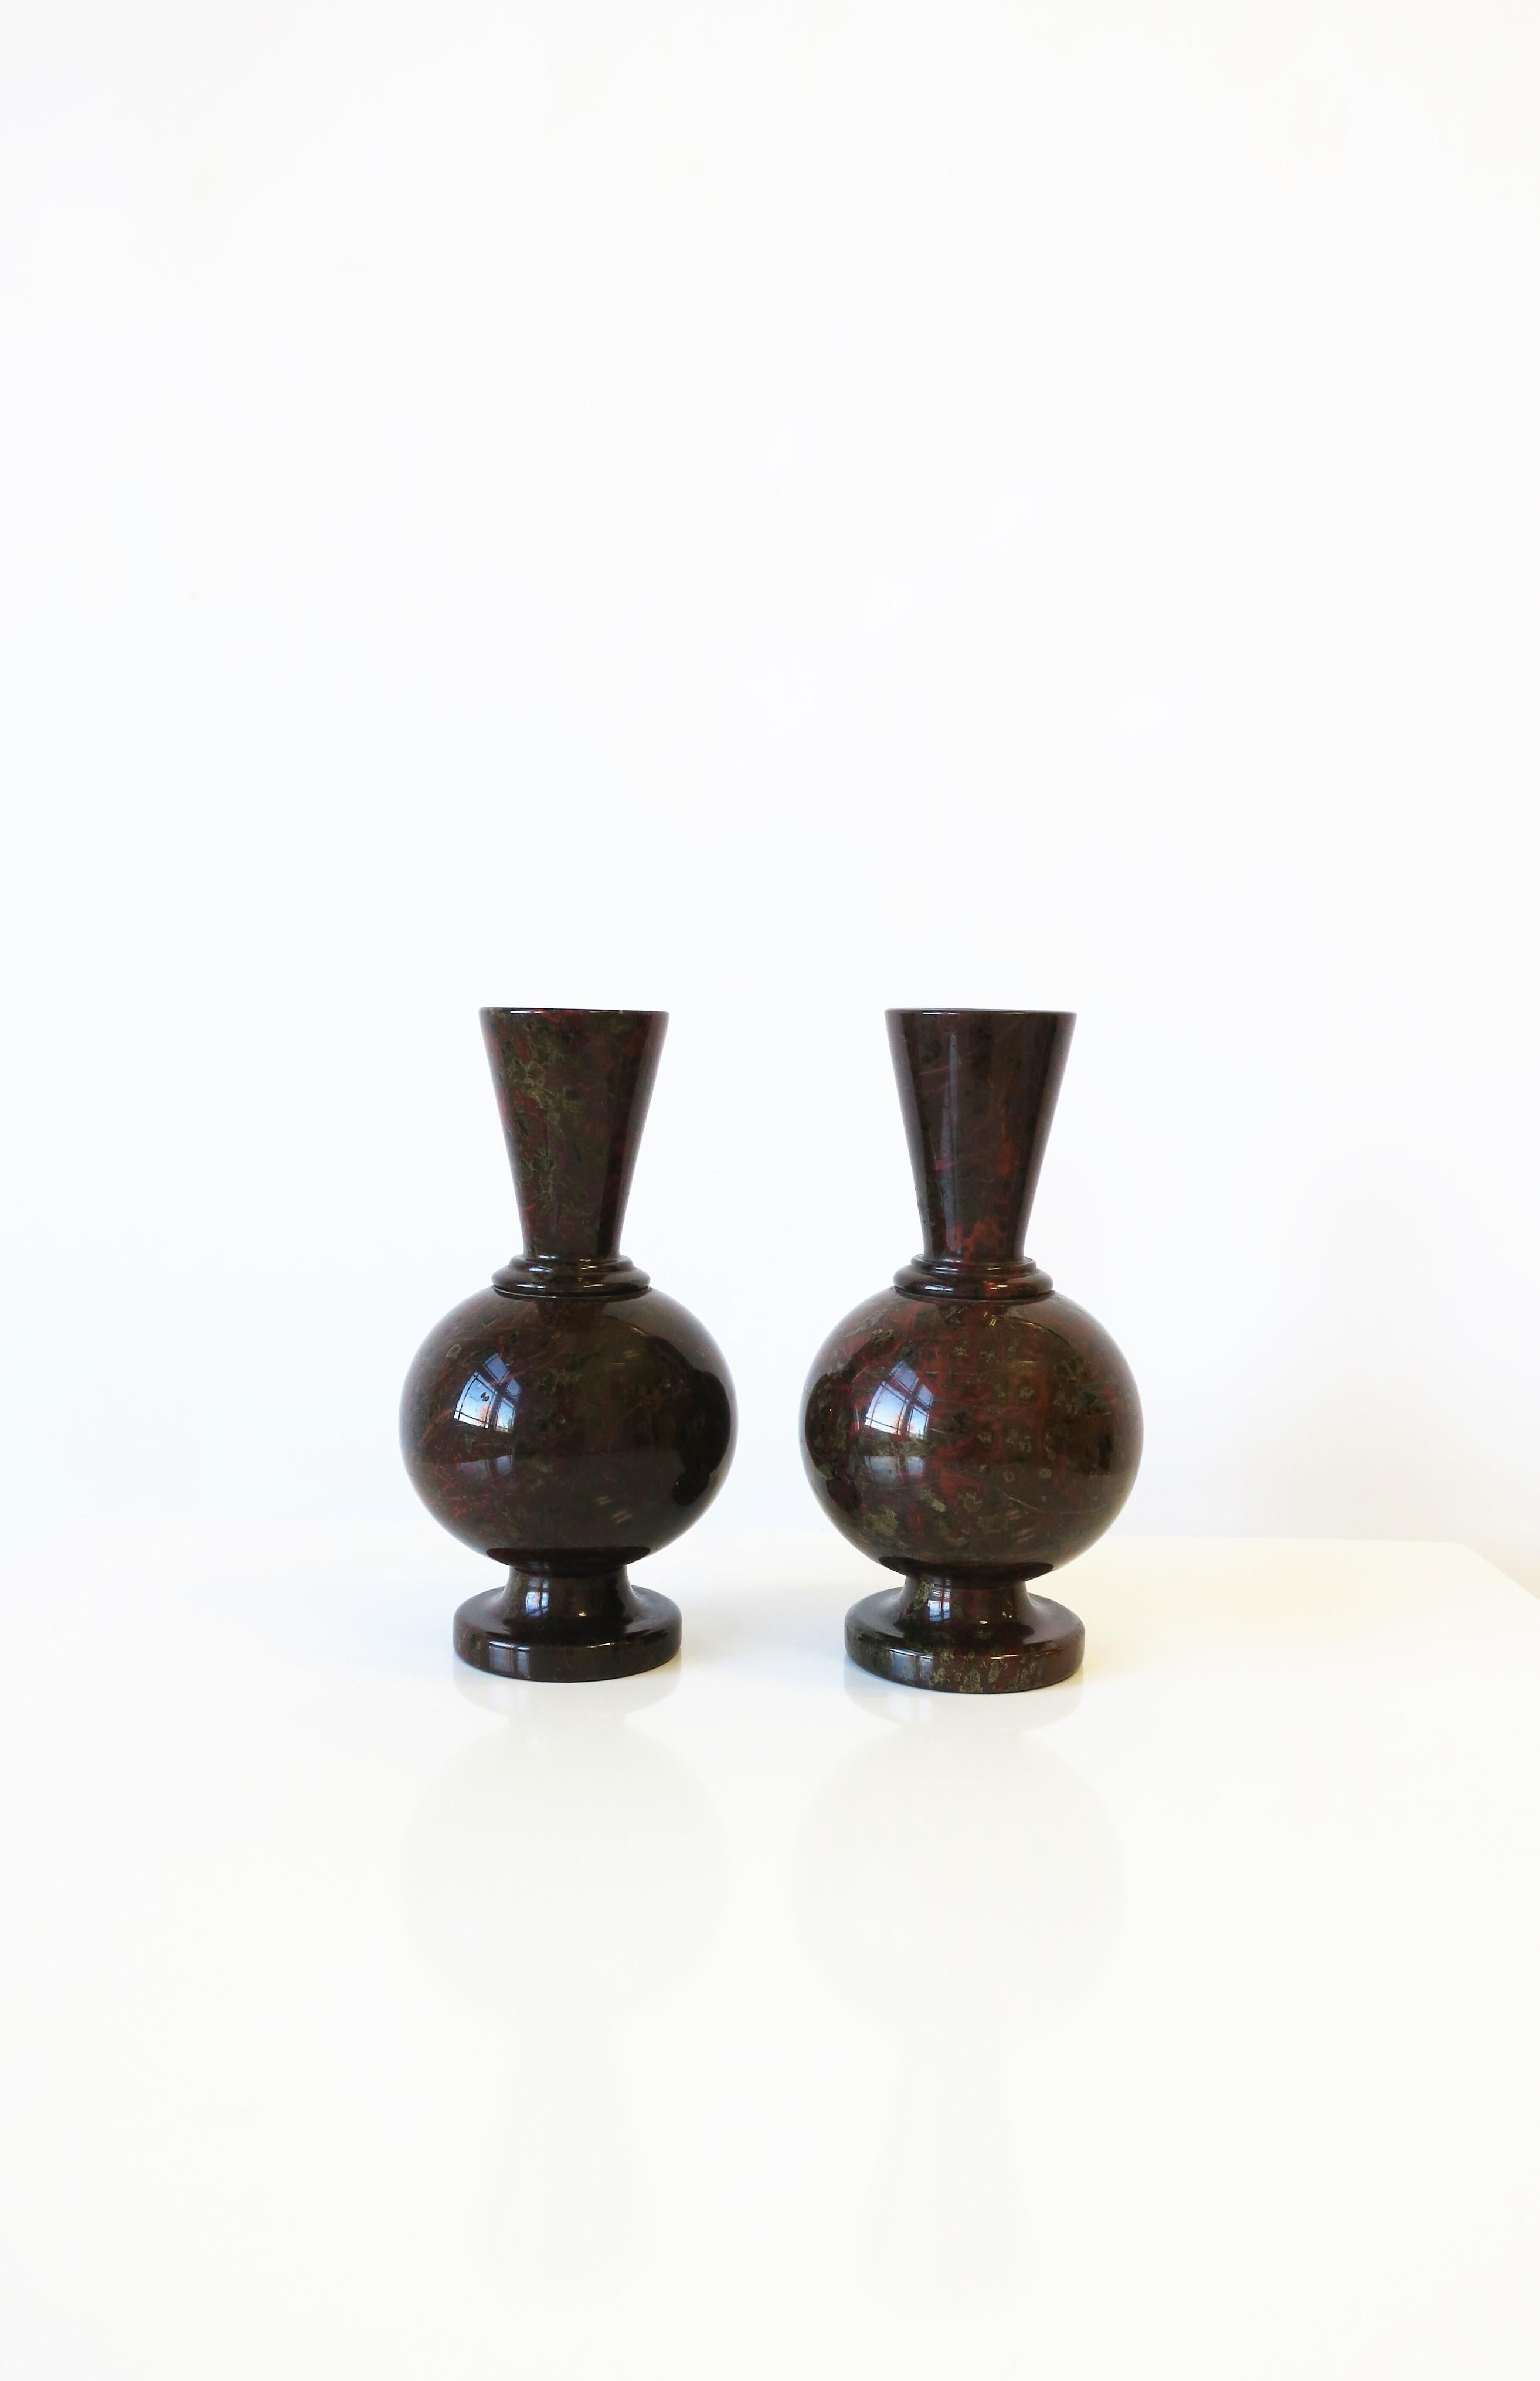 A beautiful rich pair of French Art Deco Modern marble stone vases, circa early 20th century, France. Marble stone is predominantly a dark espresso brown with red brick, light brown and green hues, polished smooth. Each vase can hold one flower